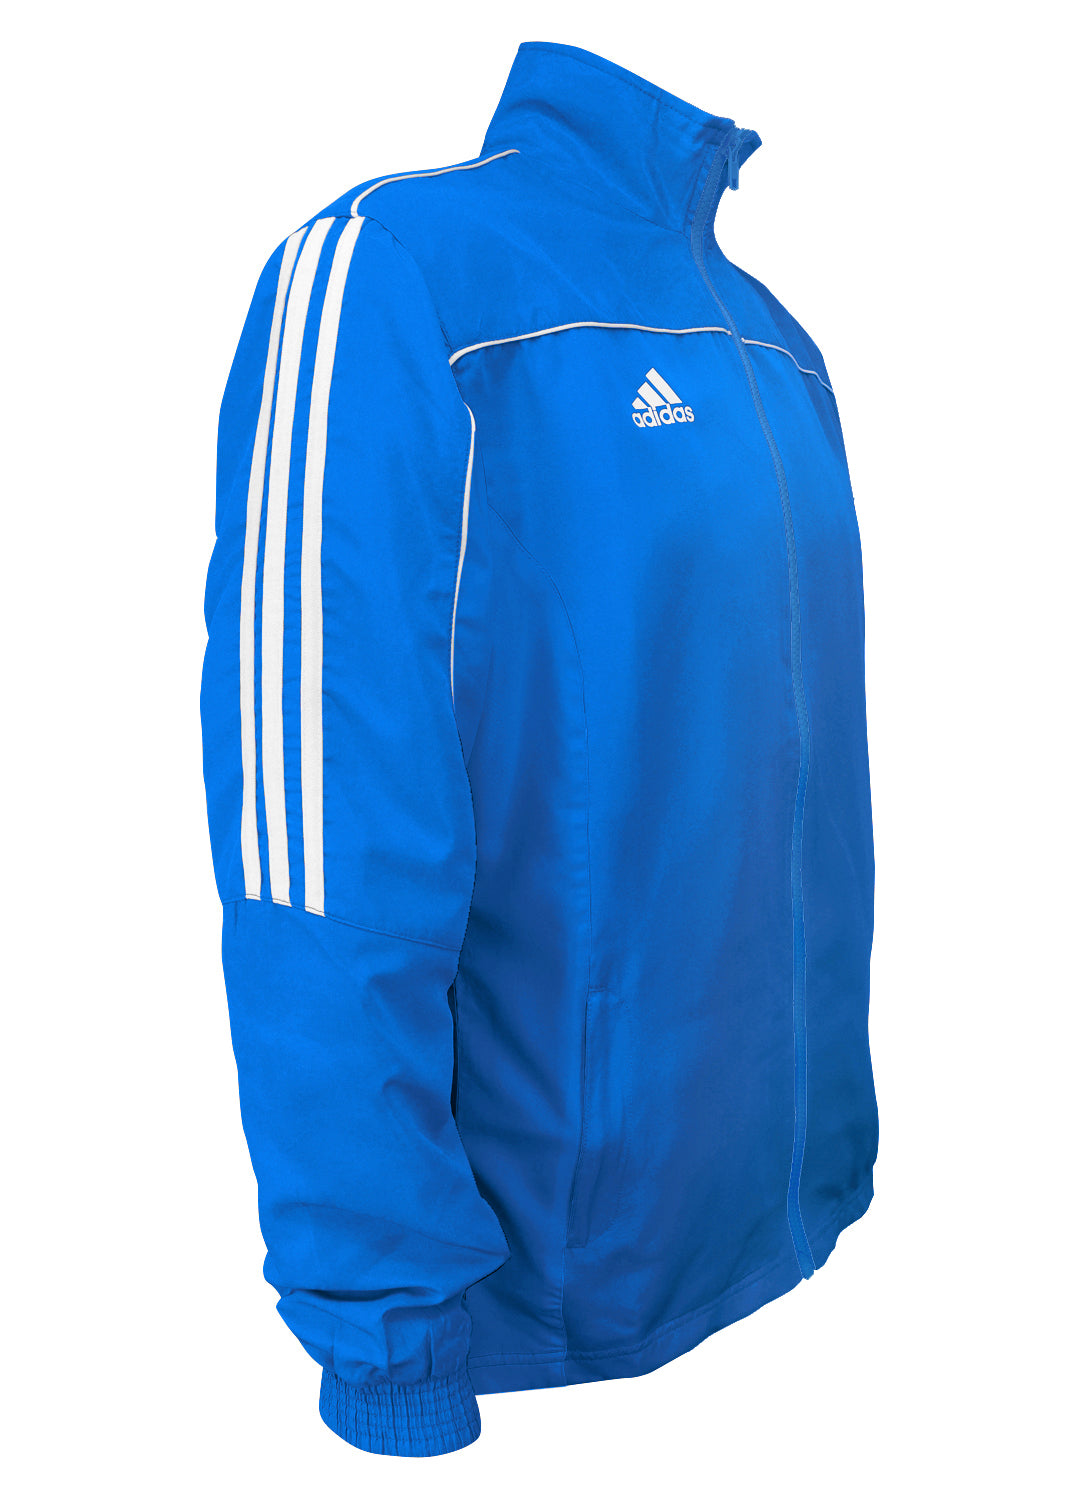 adidas Blue with White Stripes Windbreaker Style Team Jacket Side View